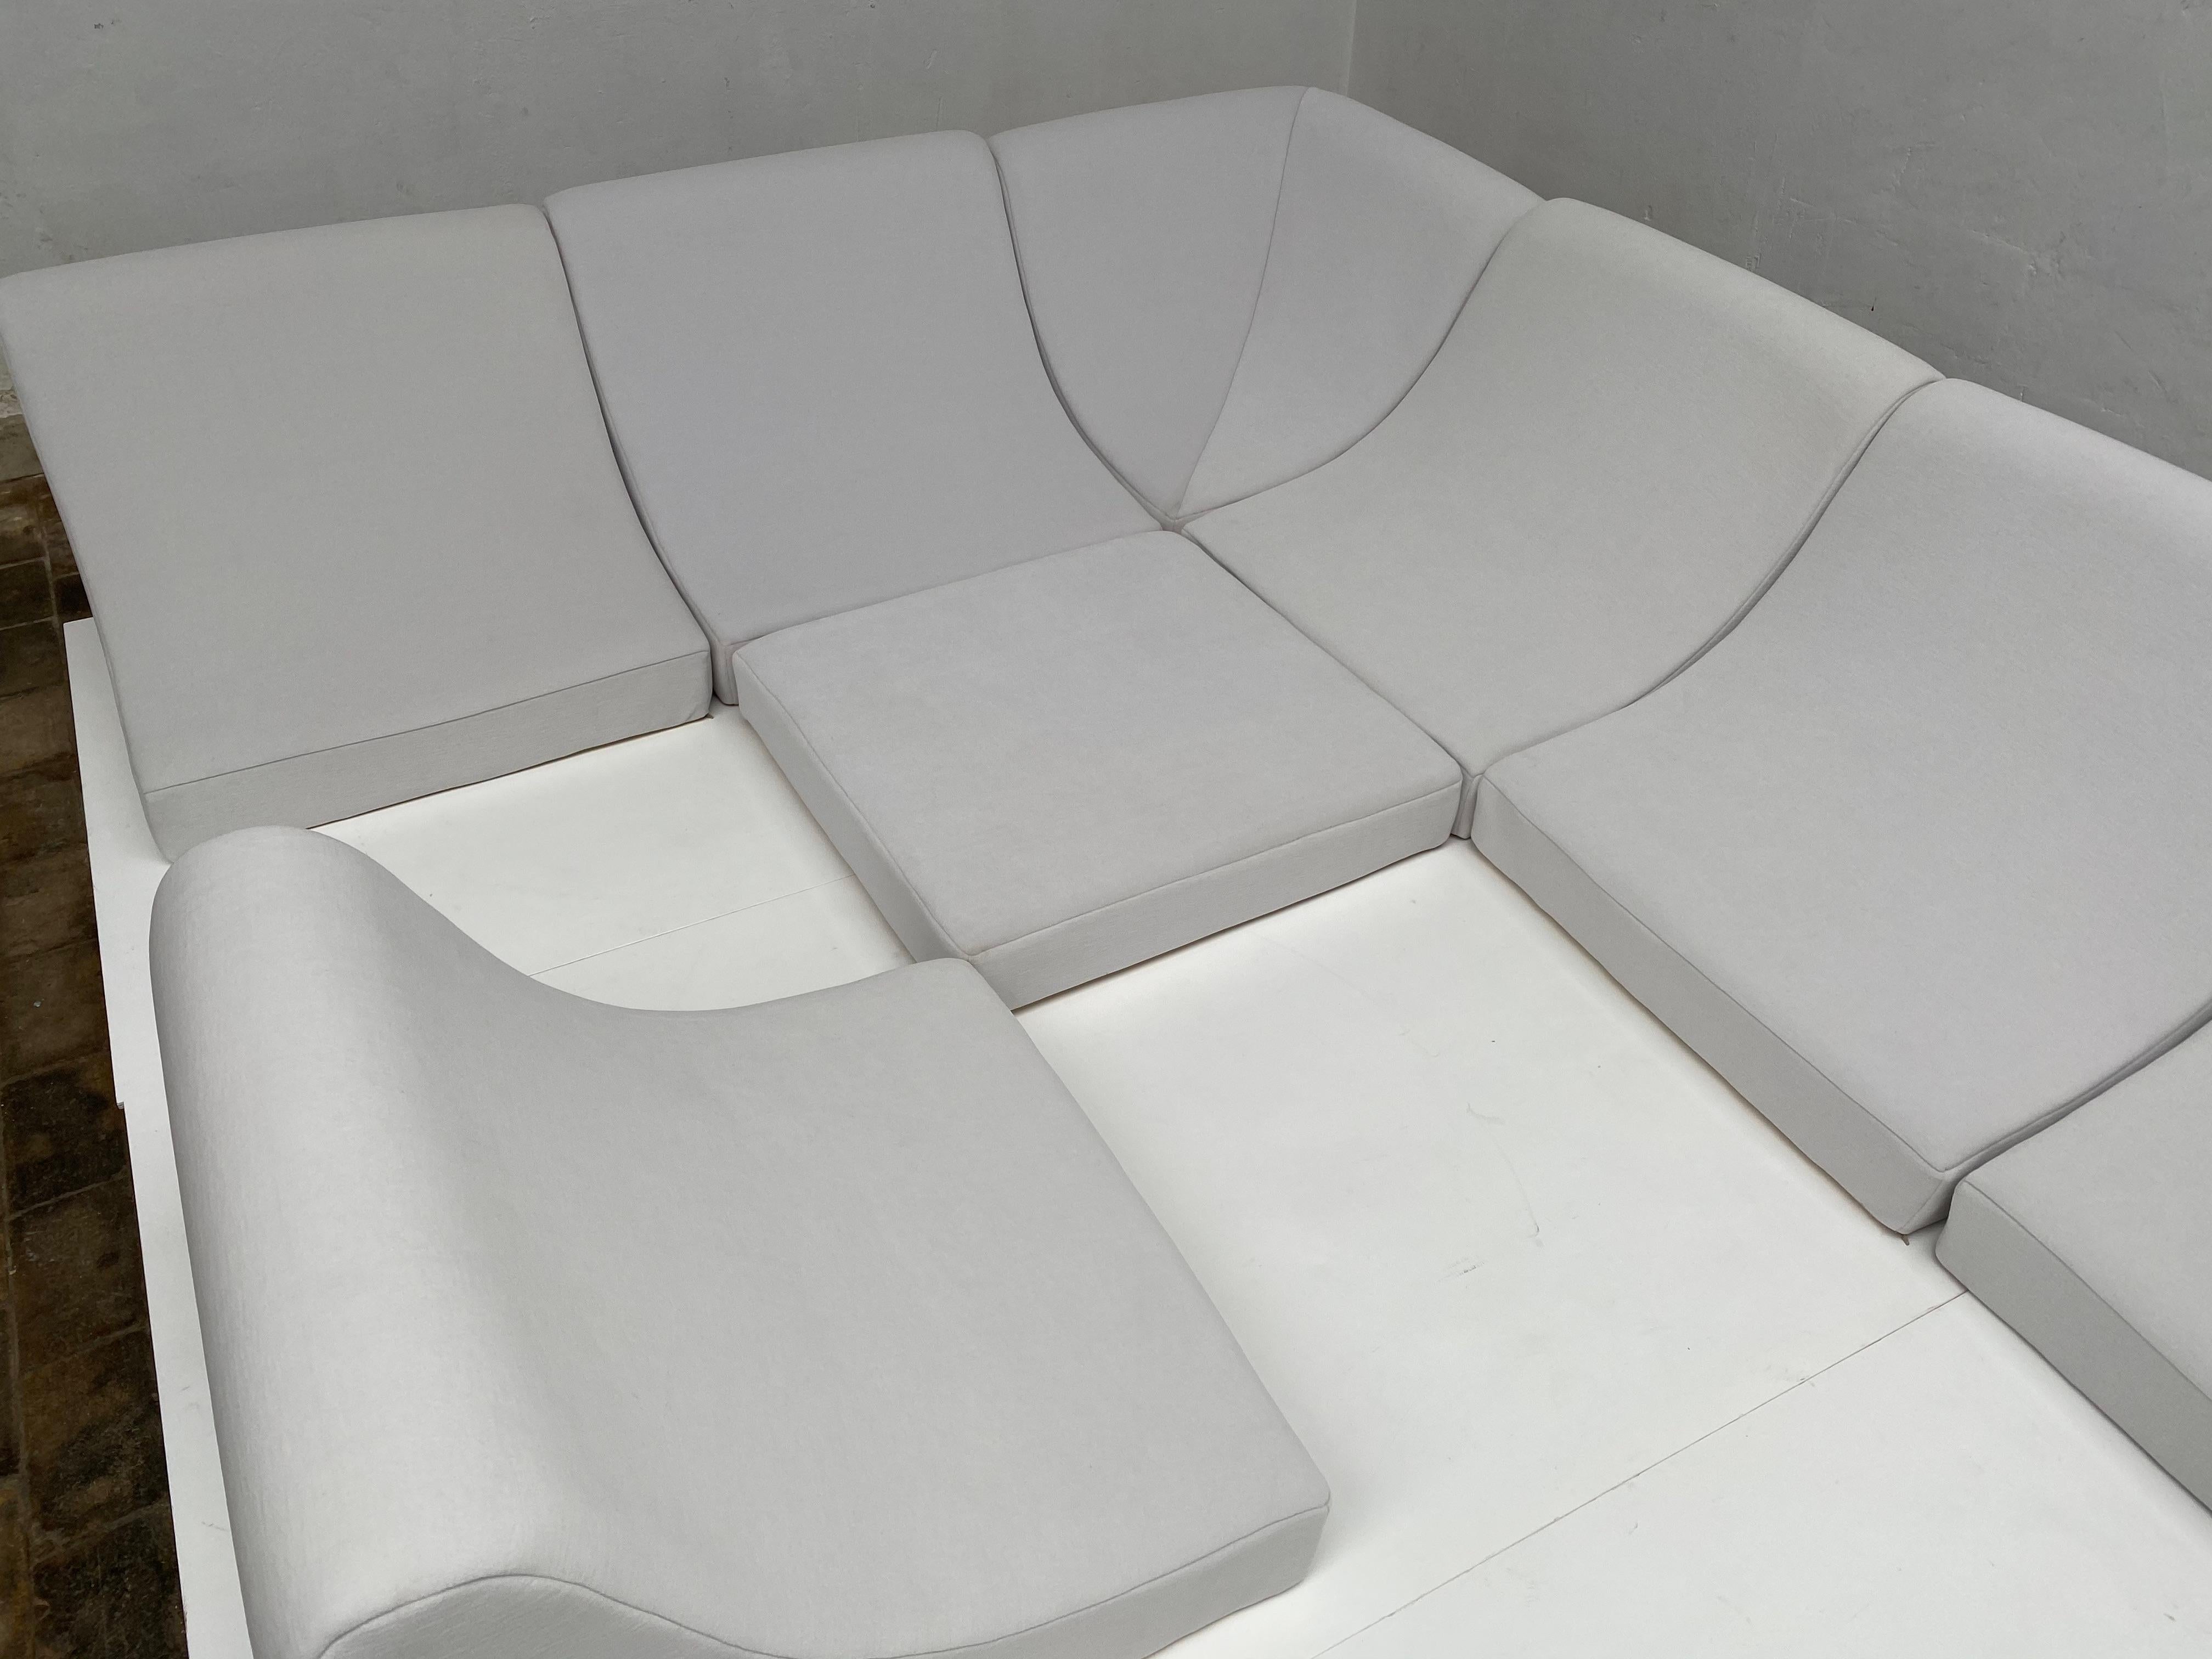 Space Age Las Vegas Custom Ordered 'Pool' Modular Sofa, by Colani including Reupholstery